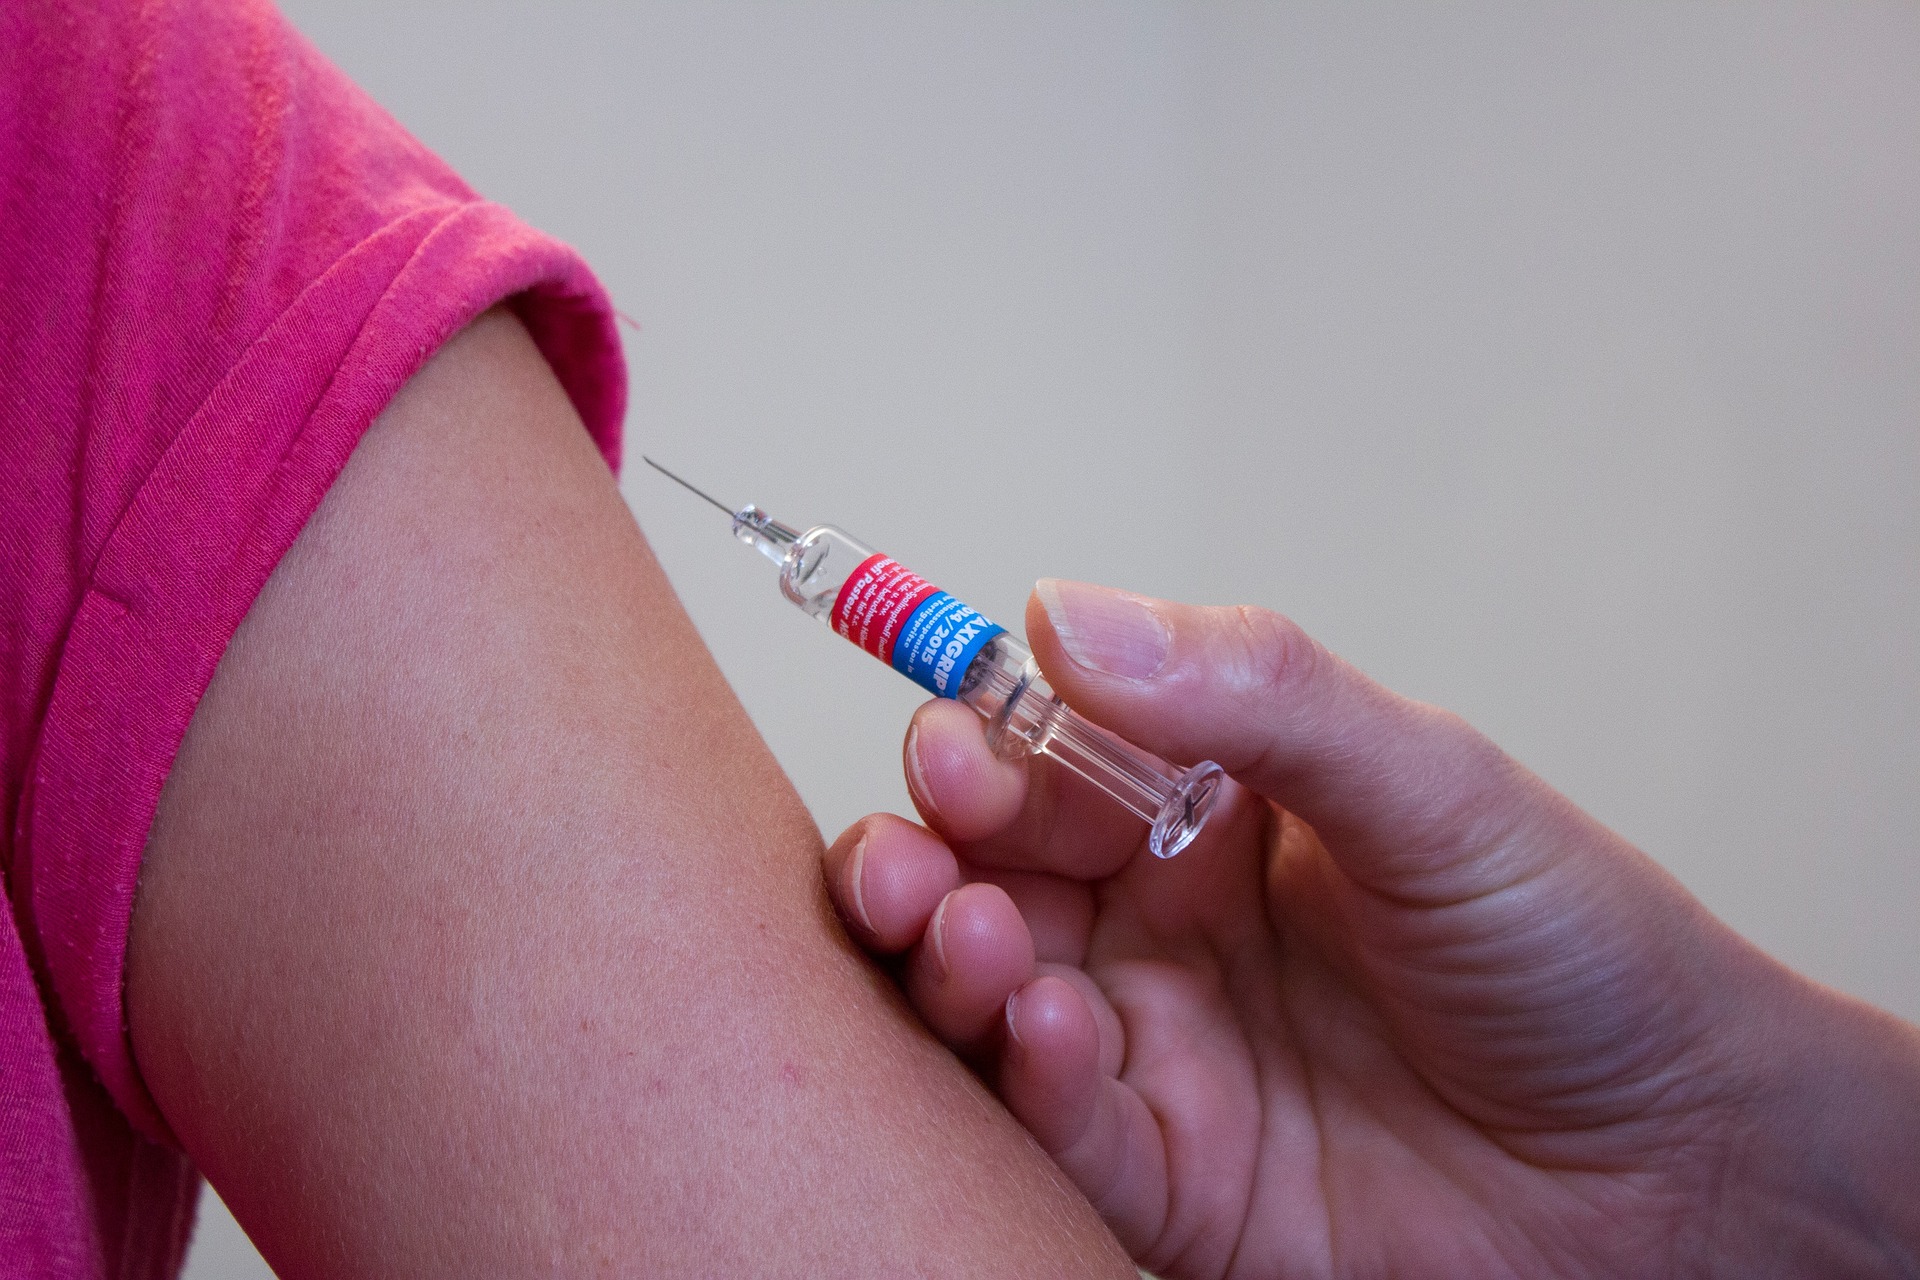 Administering vaccine in the upper arm (is there a vaccine autism link?)